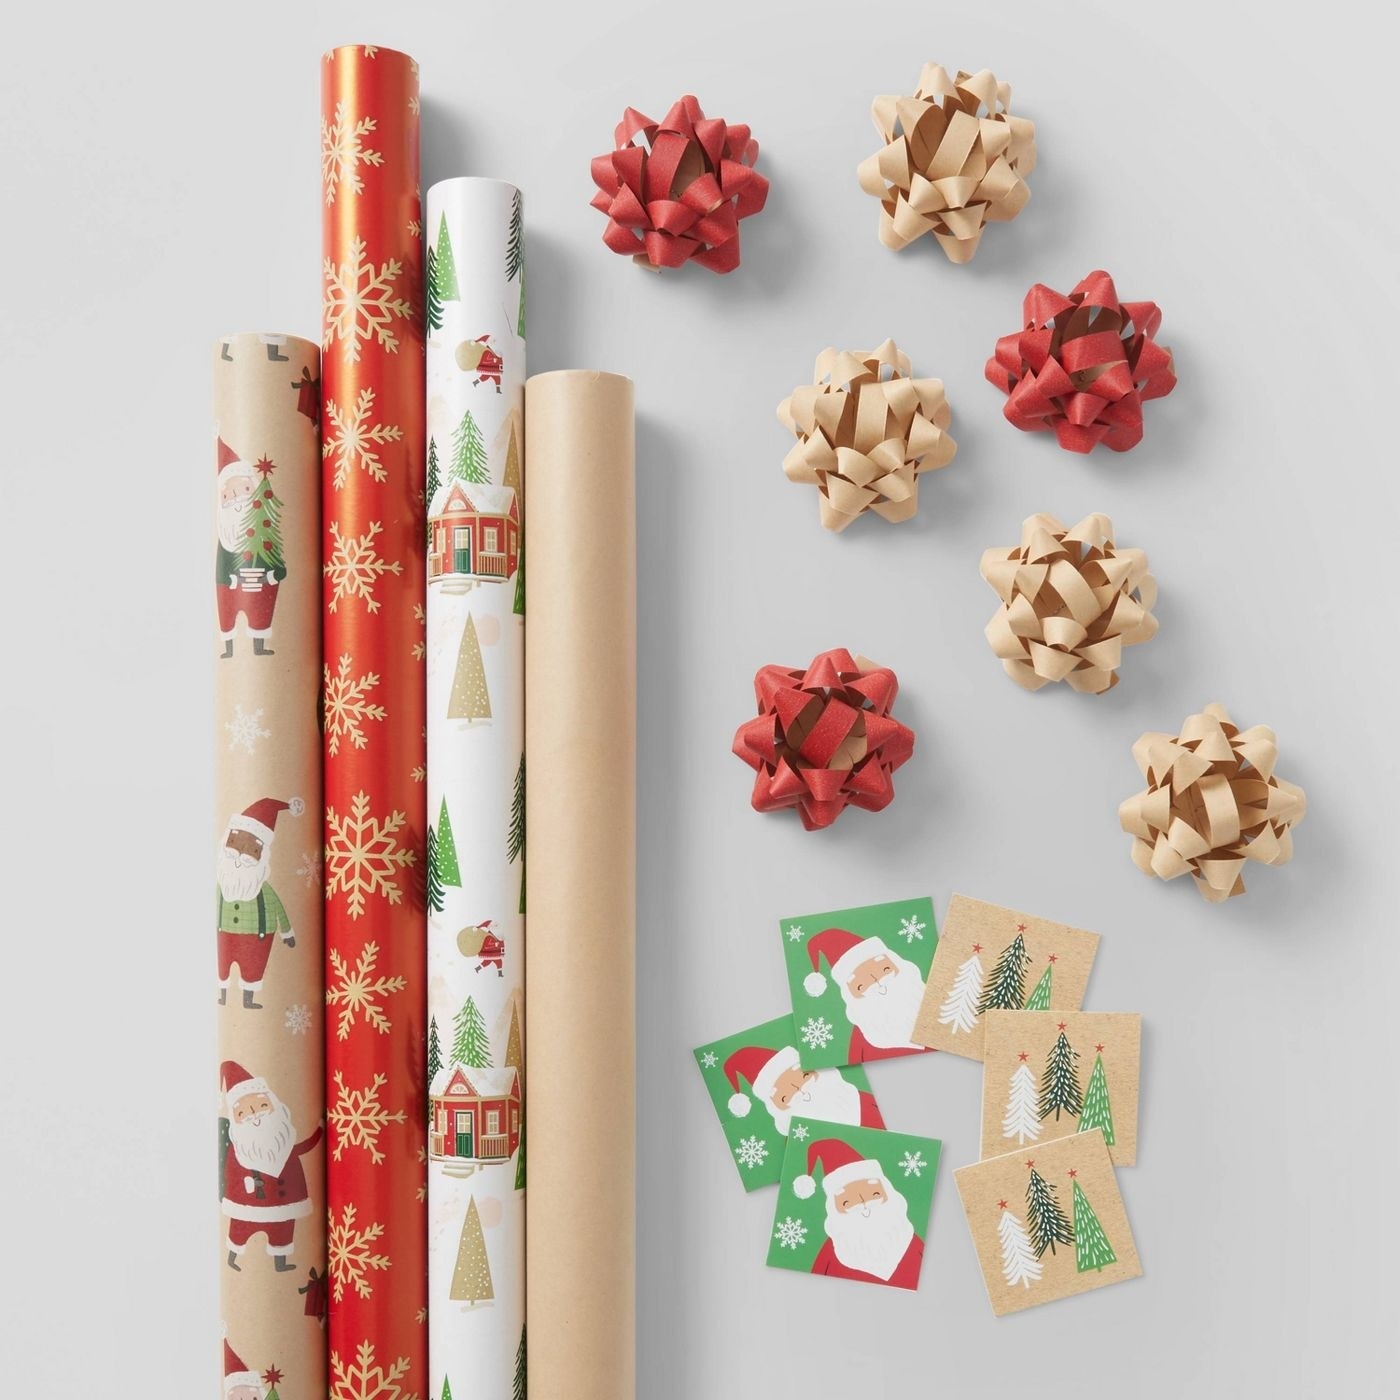 The gift wrap pack, with wrapping paper, bows, and labels.